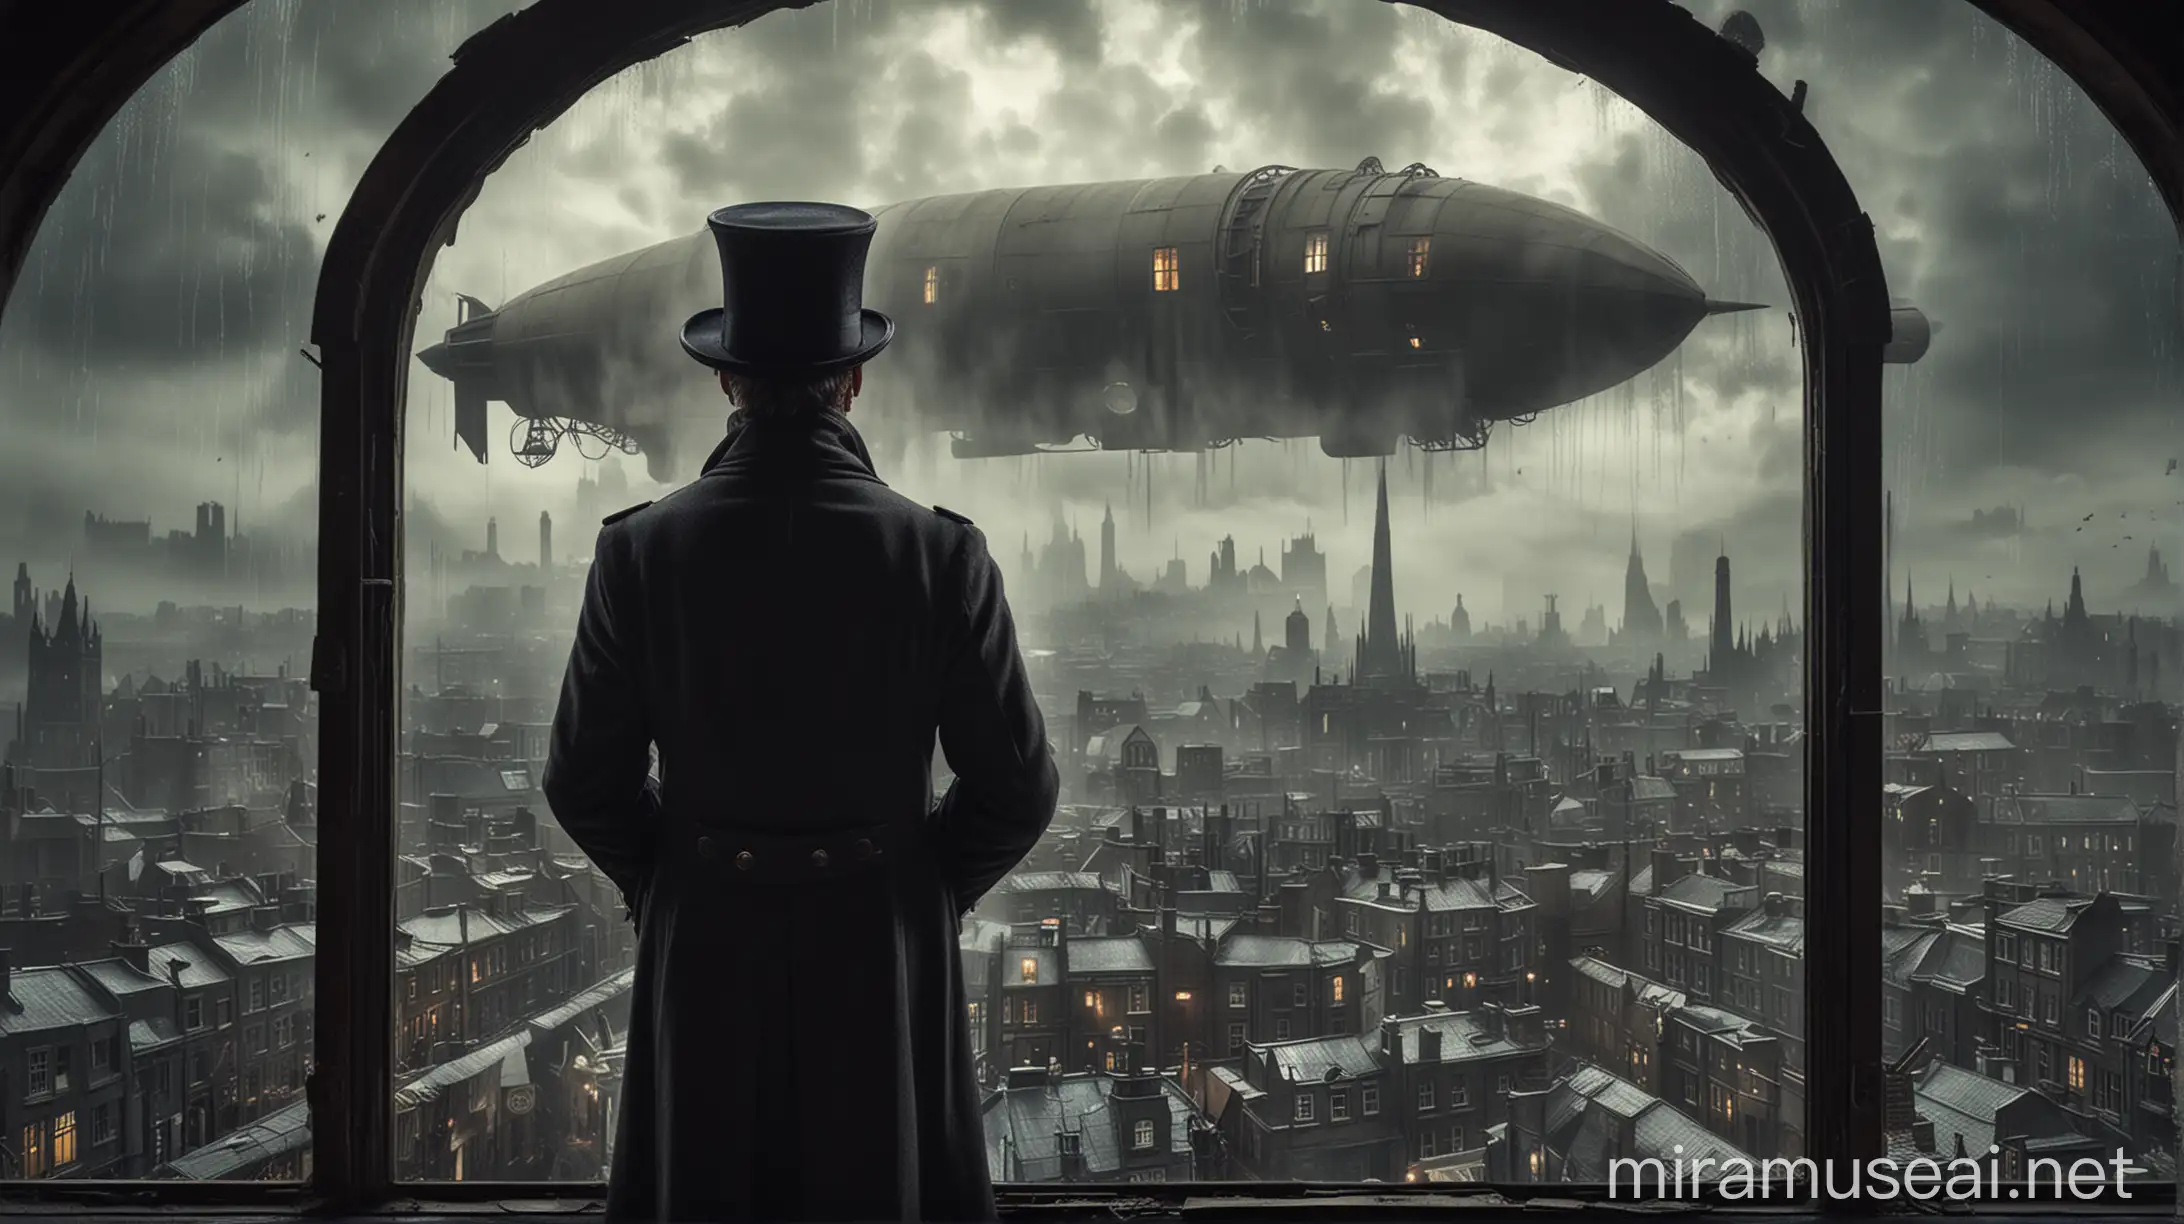 an aristocratic victorian man from behind wearing a overcoat and top hat looking through a giant window showing an entire large steampunk city, victorian towers, zeppelins airships in the sky and trains at a dark foggy rainy night.